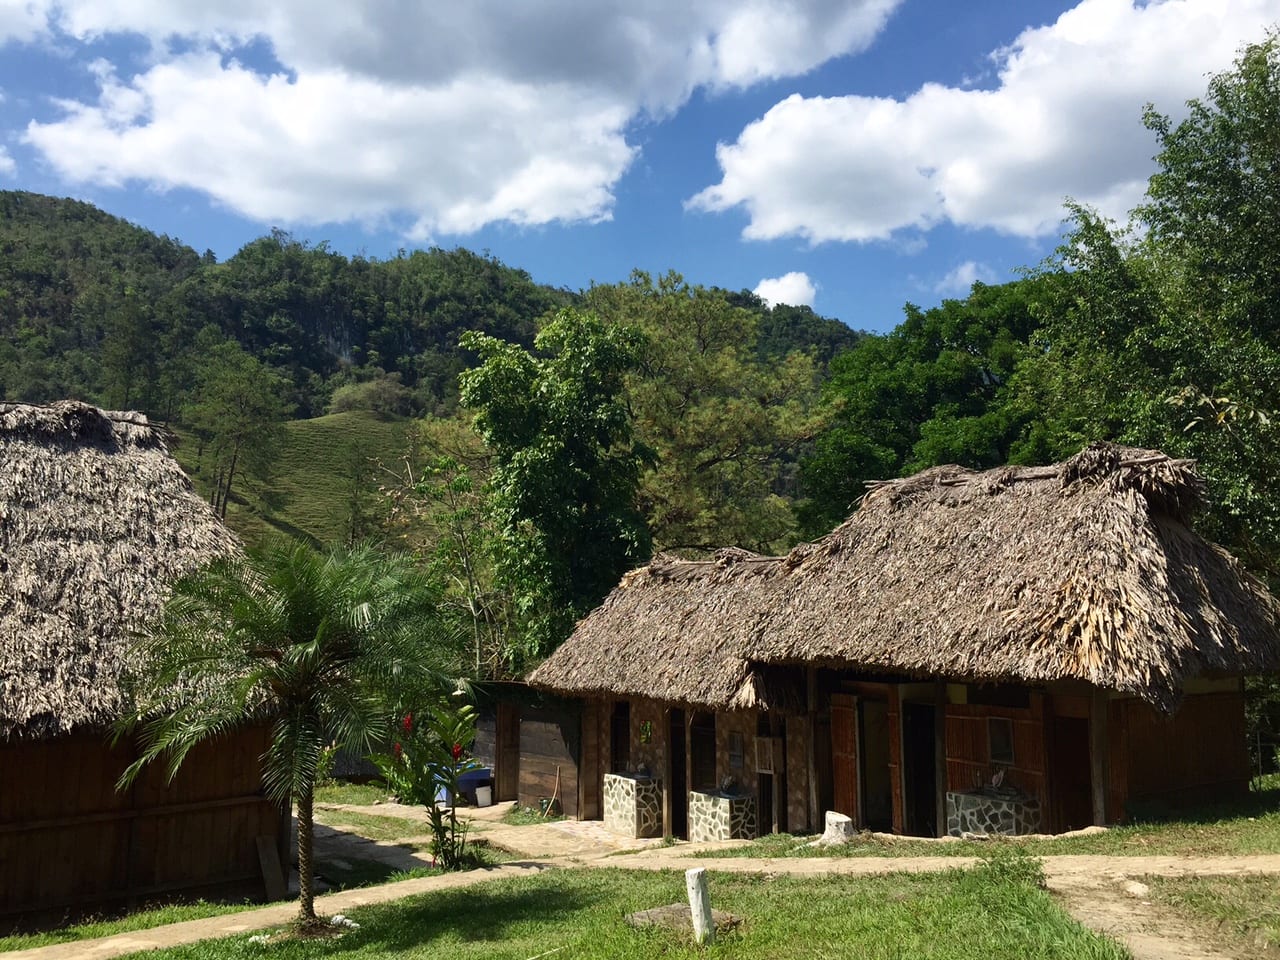 Two thatched roof cabins at El Retiro Lodge, set among the trees.